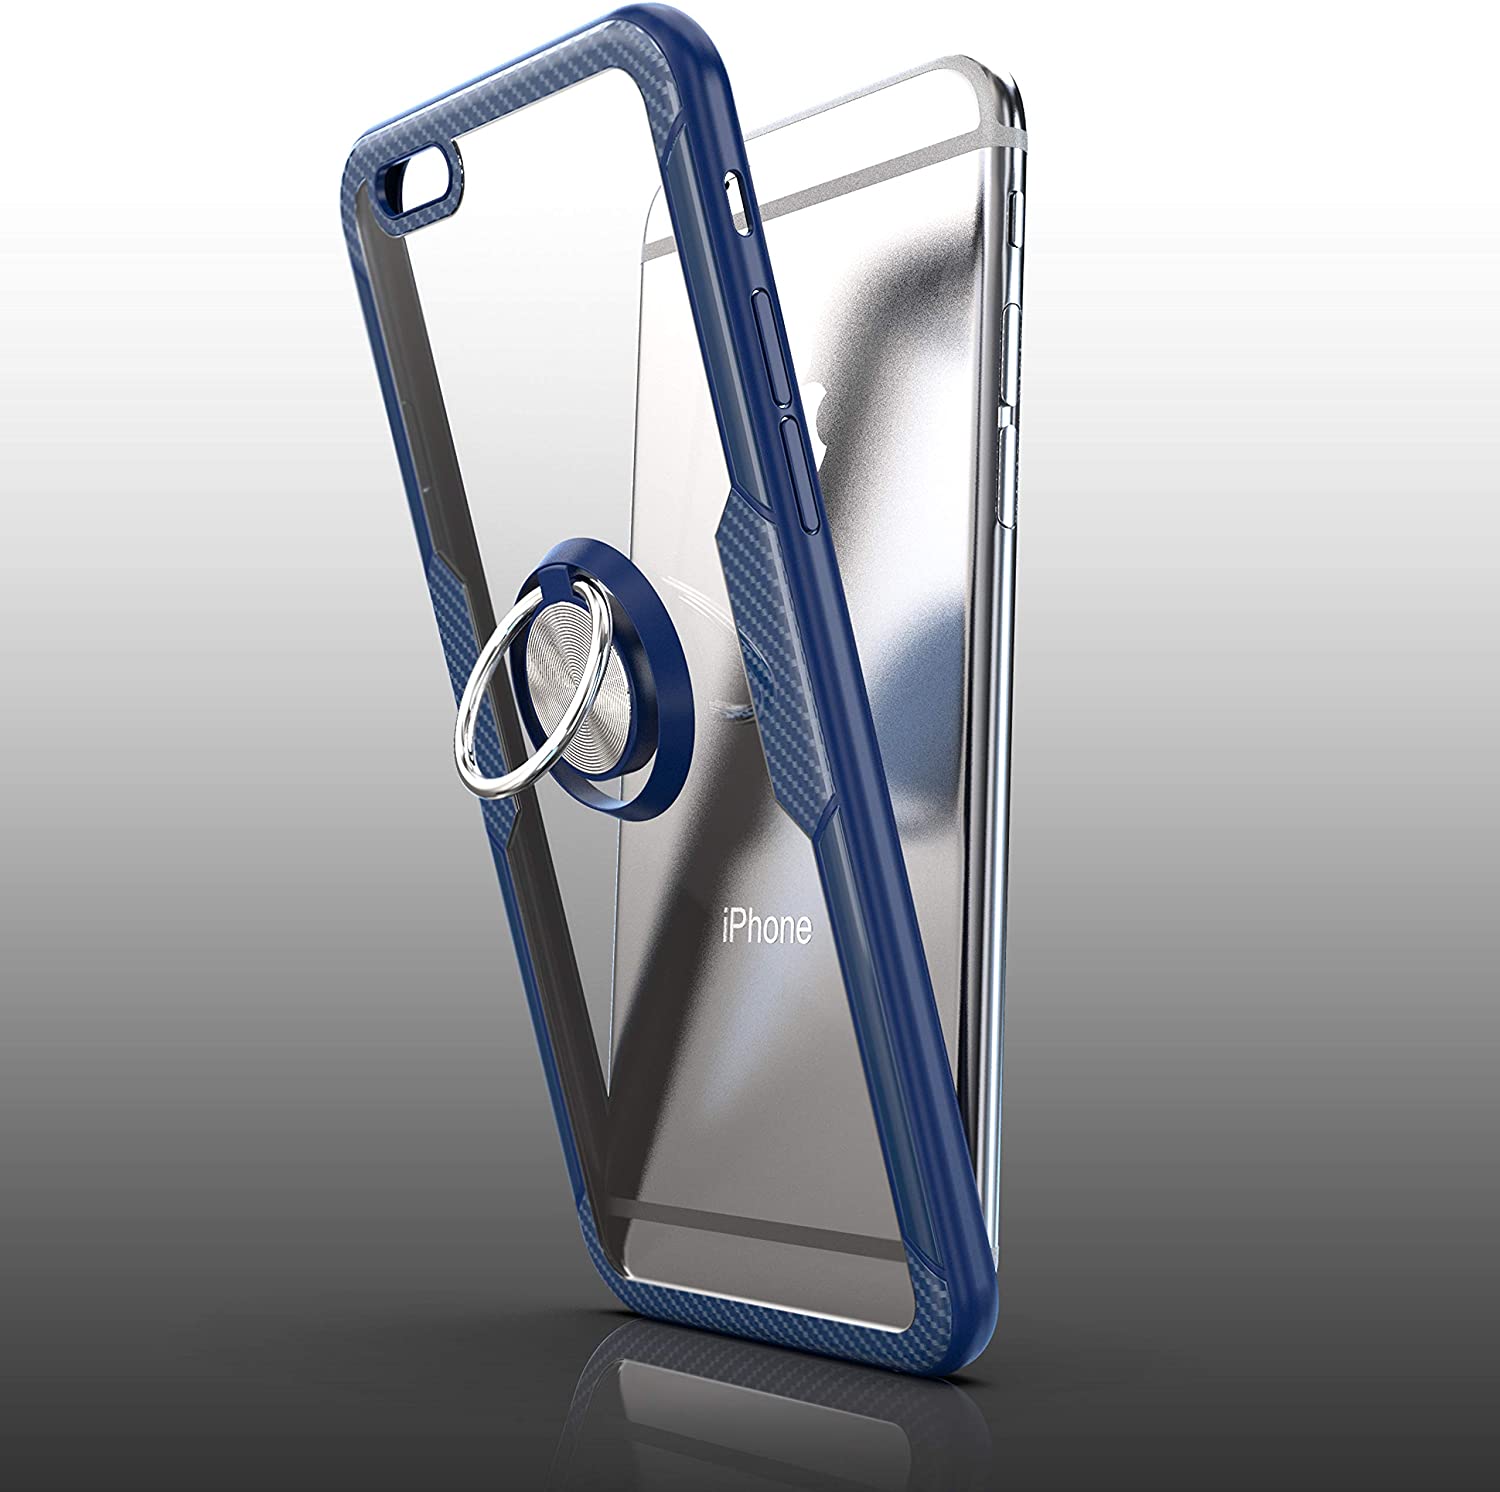 iPhone 6 Plus / iPhone 6s Plus Case with Ring Holder Blue